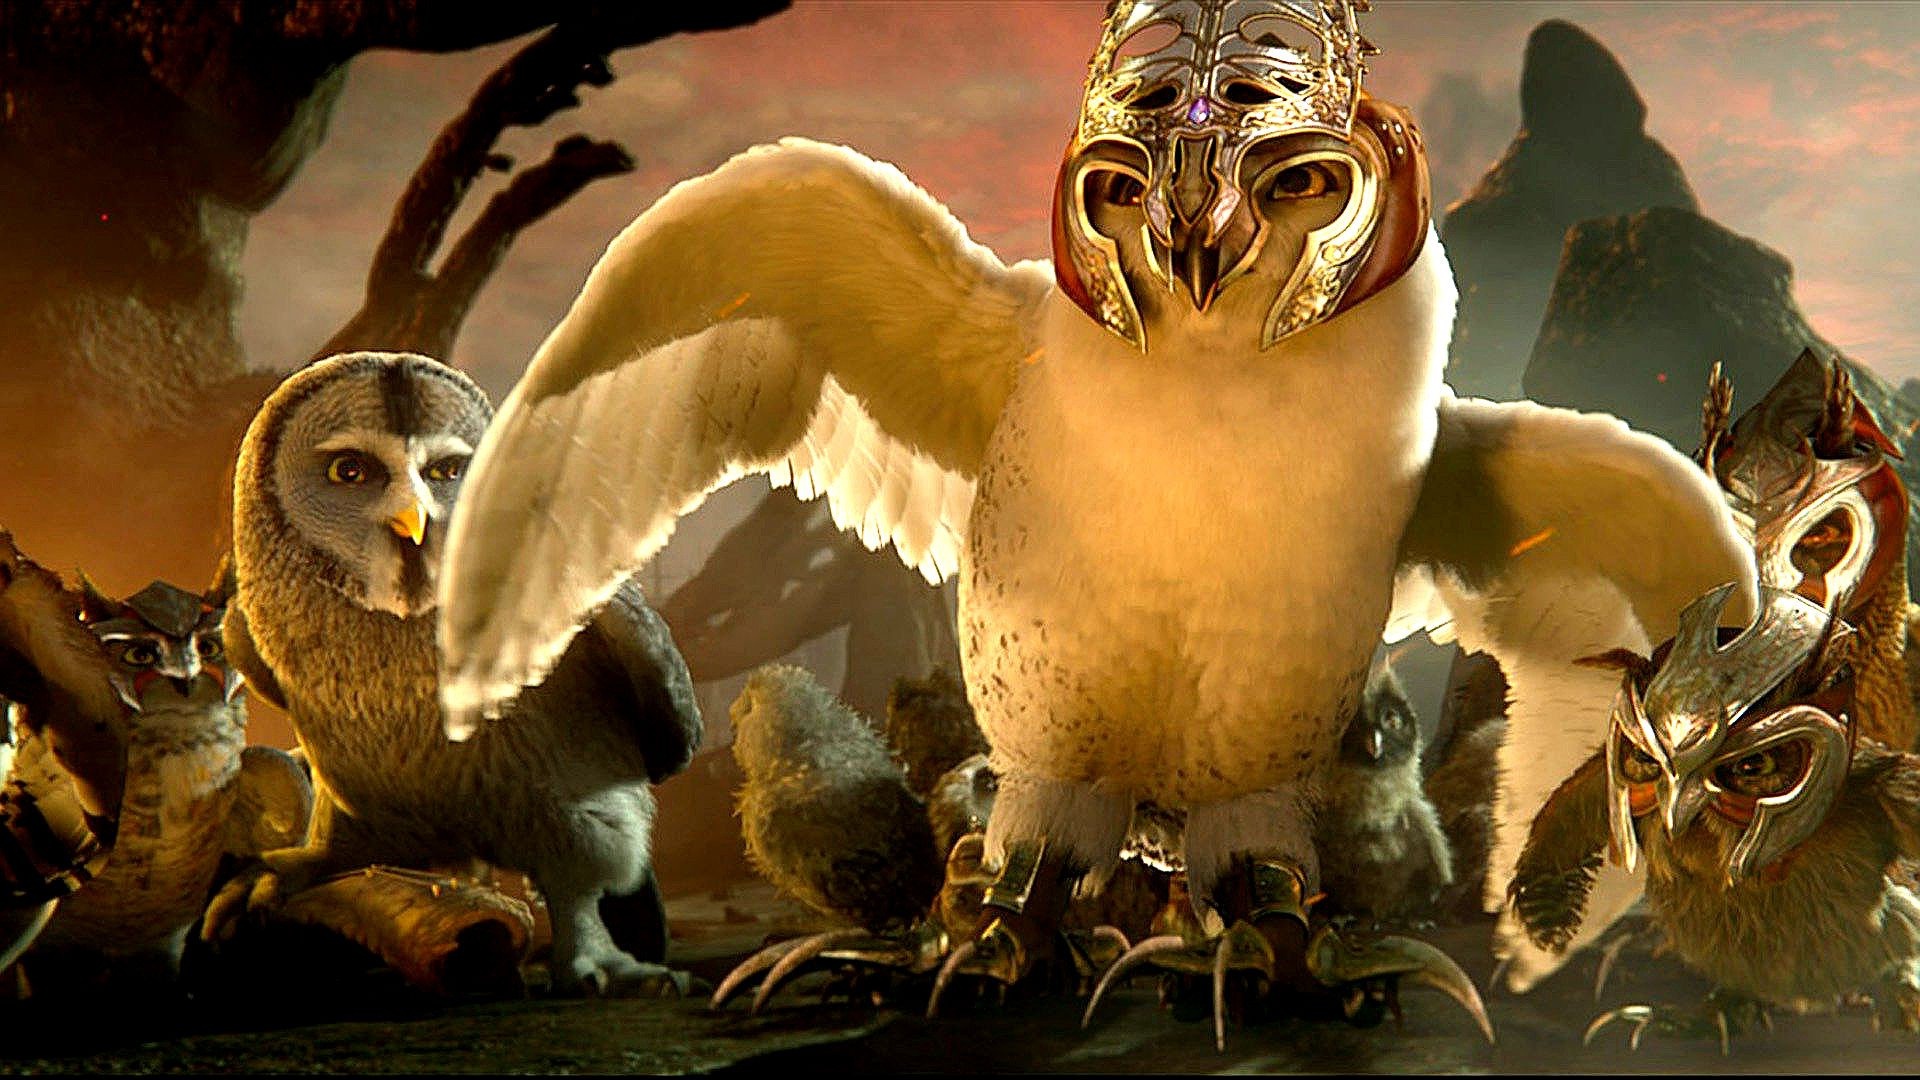 Legend of the Guardians: The Owls of Ga'Hoole, Zack Snyder film, Captivating movie, Majestic owls, 1920x1080 Full HD Desktop